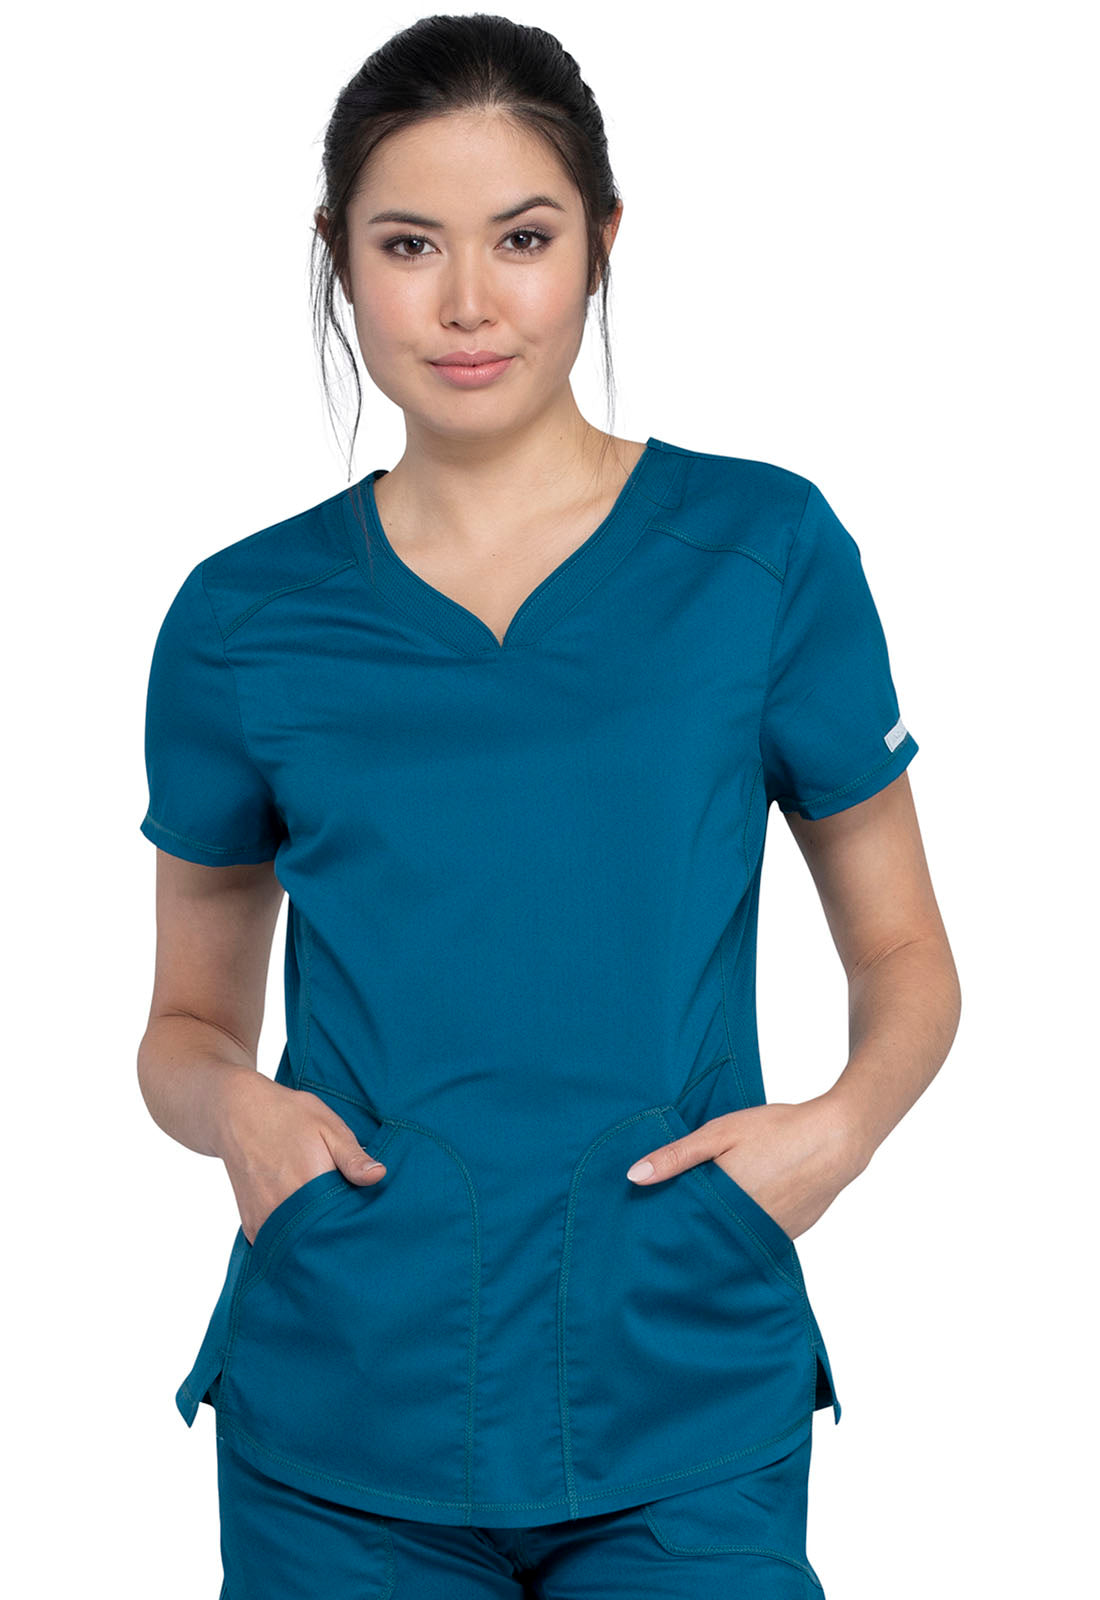 Luxe by cherokee and new Luxe Sport scrubs